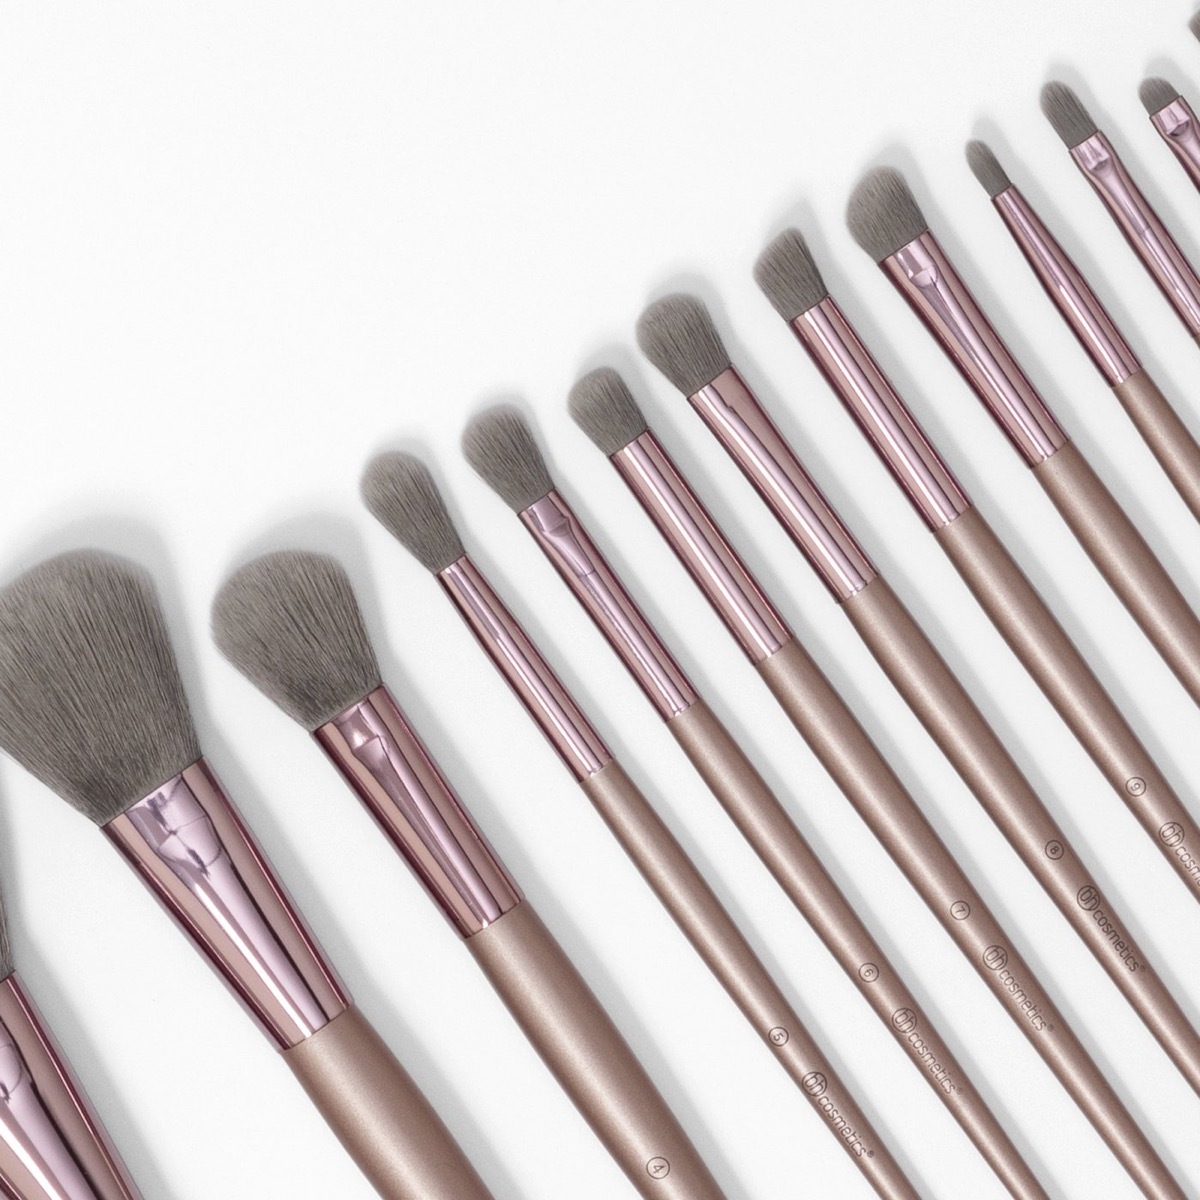 BH Cosmetics Brushes {Save Money on Beauty Products}